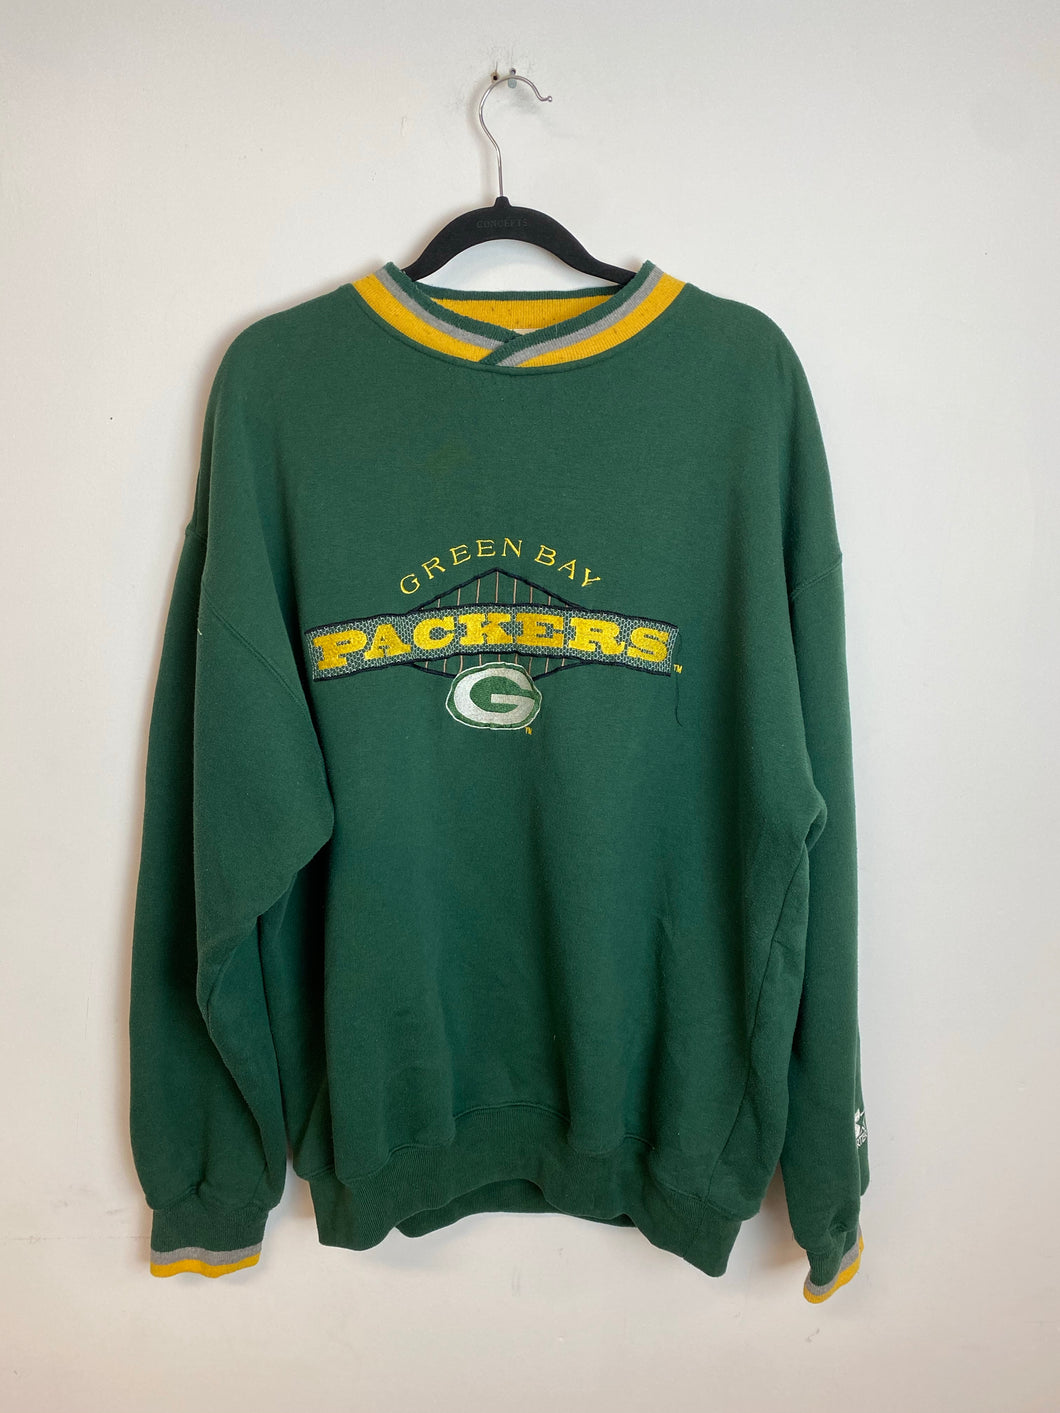 Vintage Embroidered Green Bay Packers Crewneck - XL